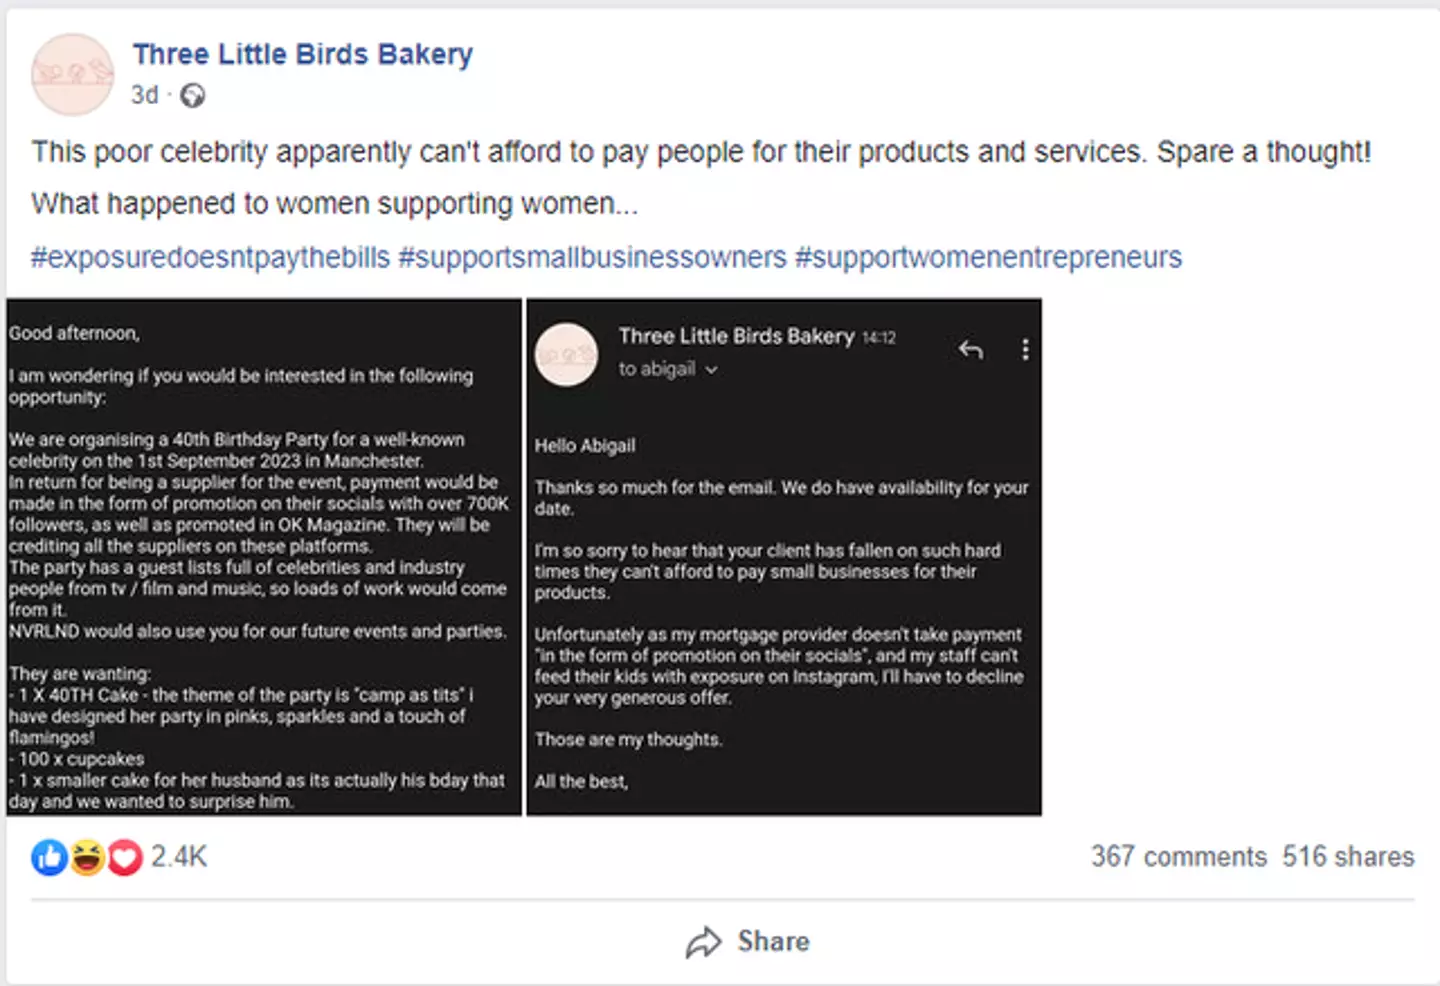 A Bradford bakery is being praised for its response to a ‘well-known celebrity’ offering ‘exposure’ in return for free cakes.